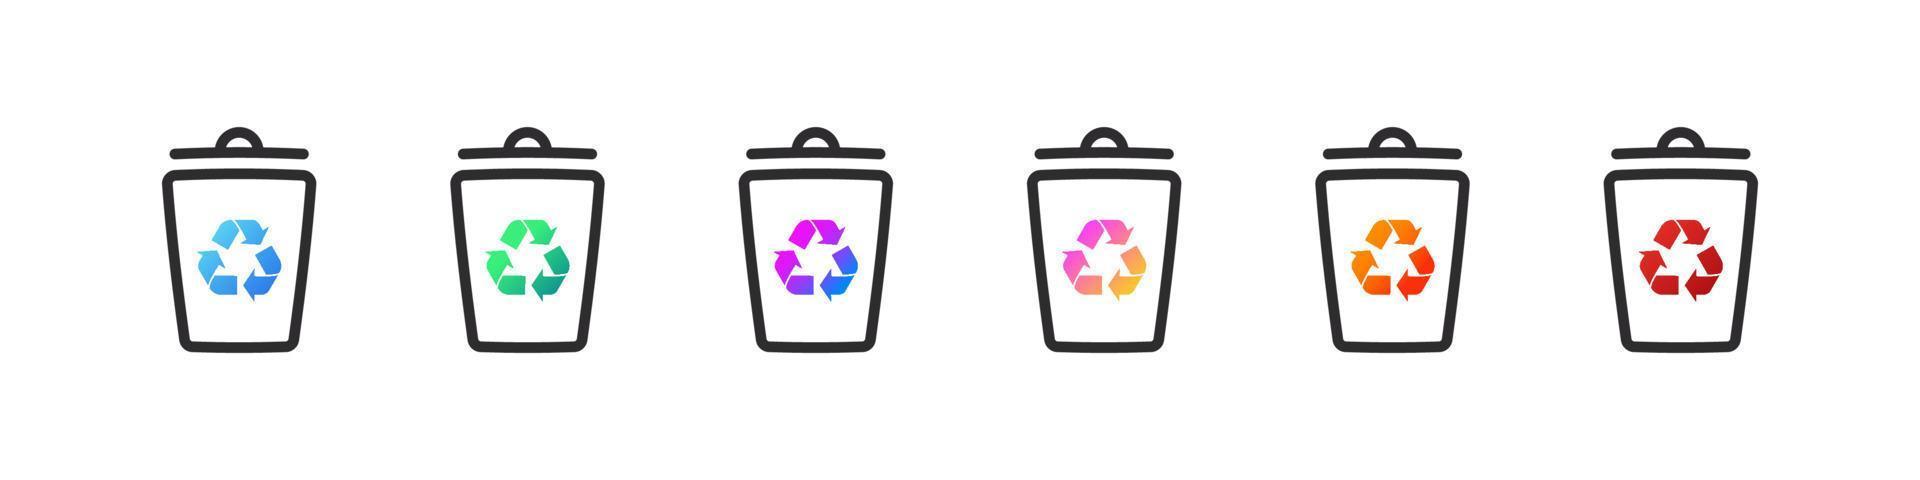 Recycle bins set. Icons of trash cans for different types of waste. Vector illustration